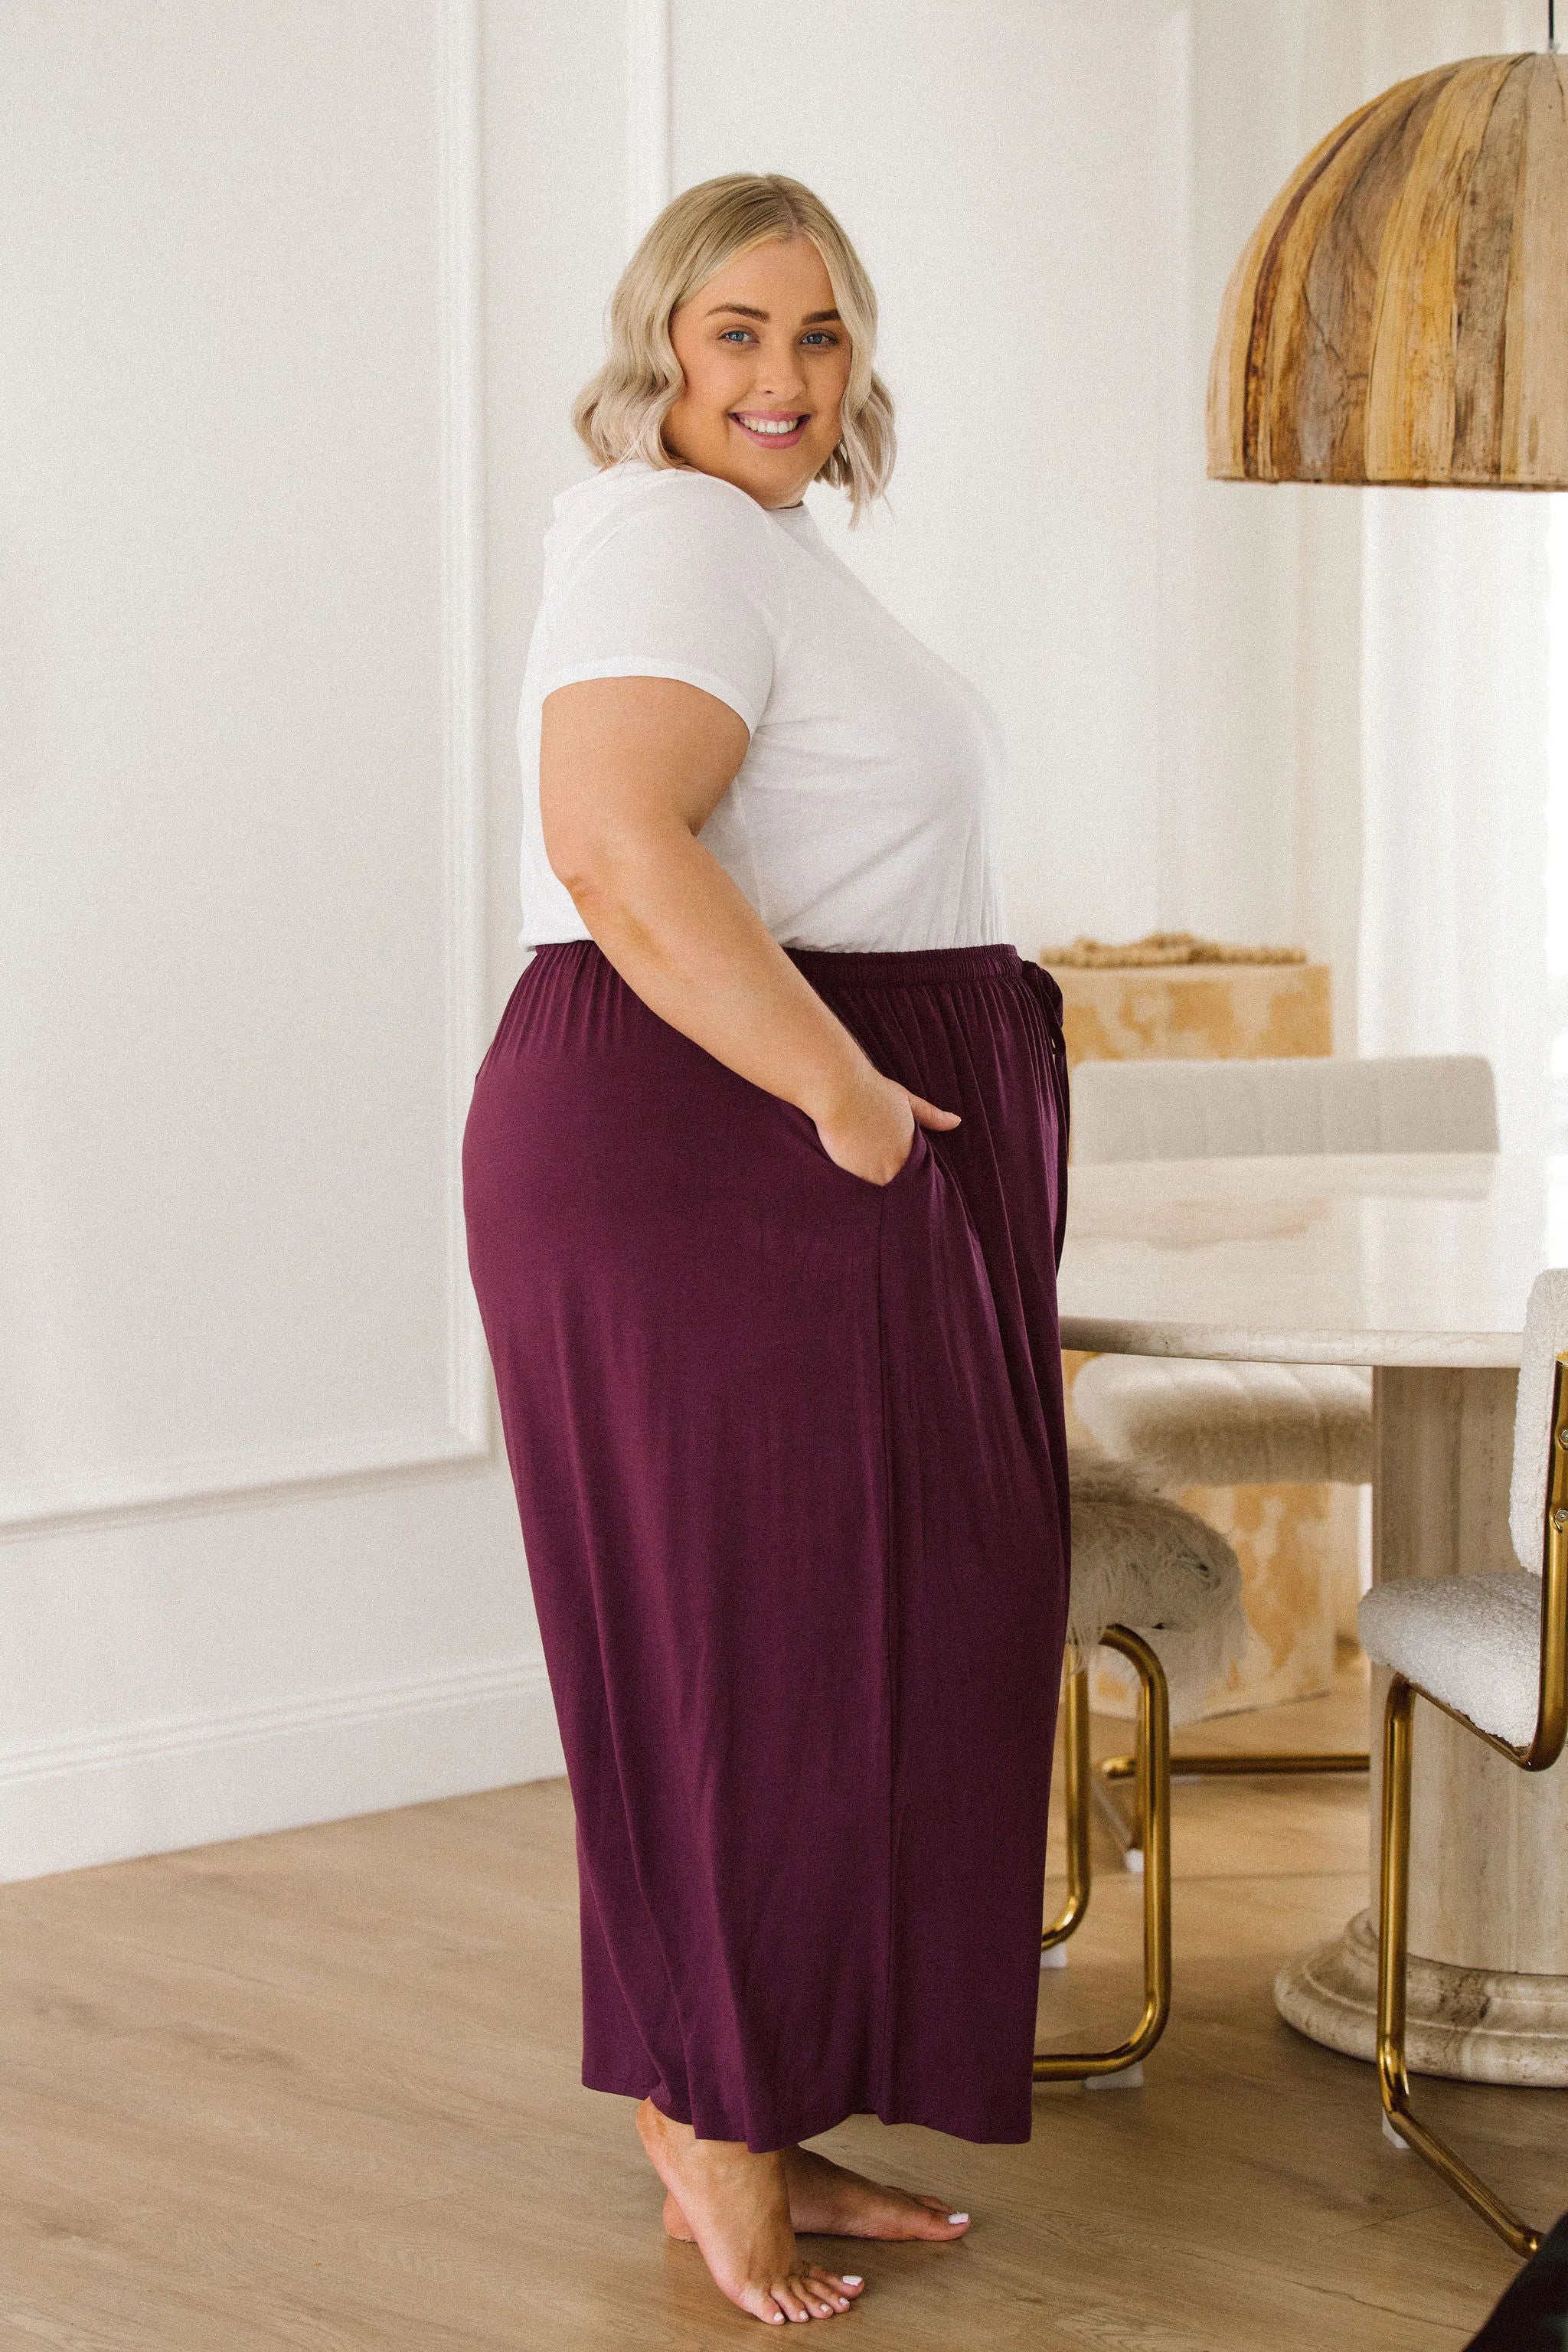 Flattering Berry Plus Size Pants - Darcy Pants by Peach The Label